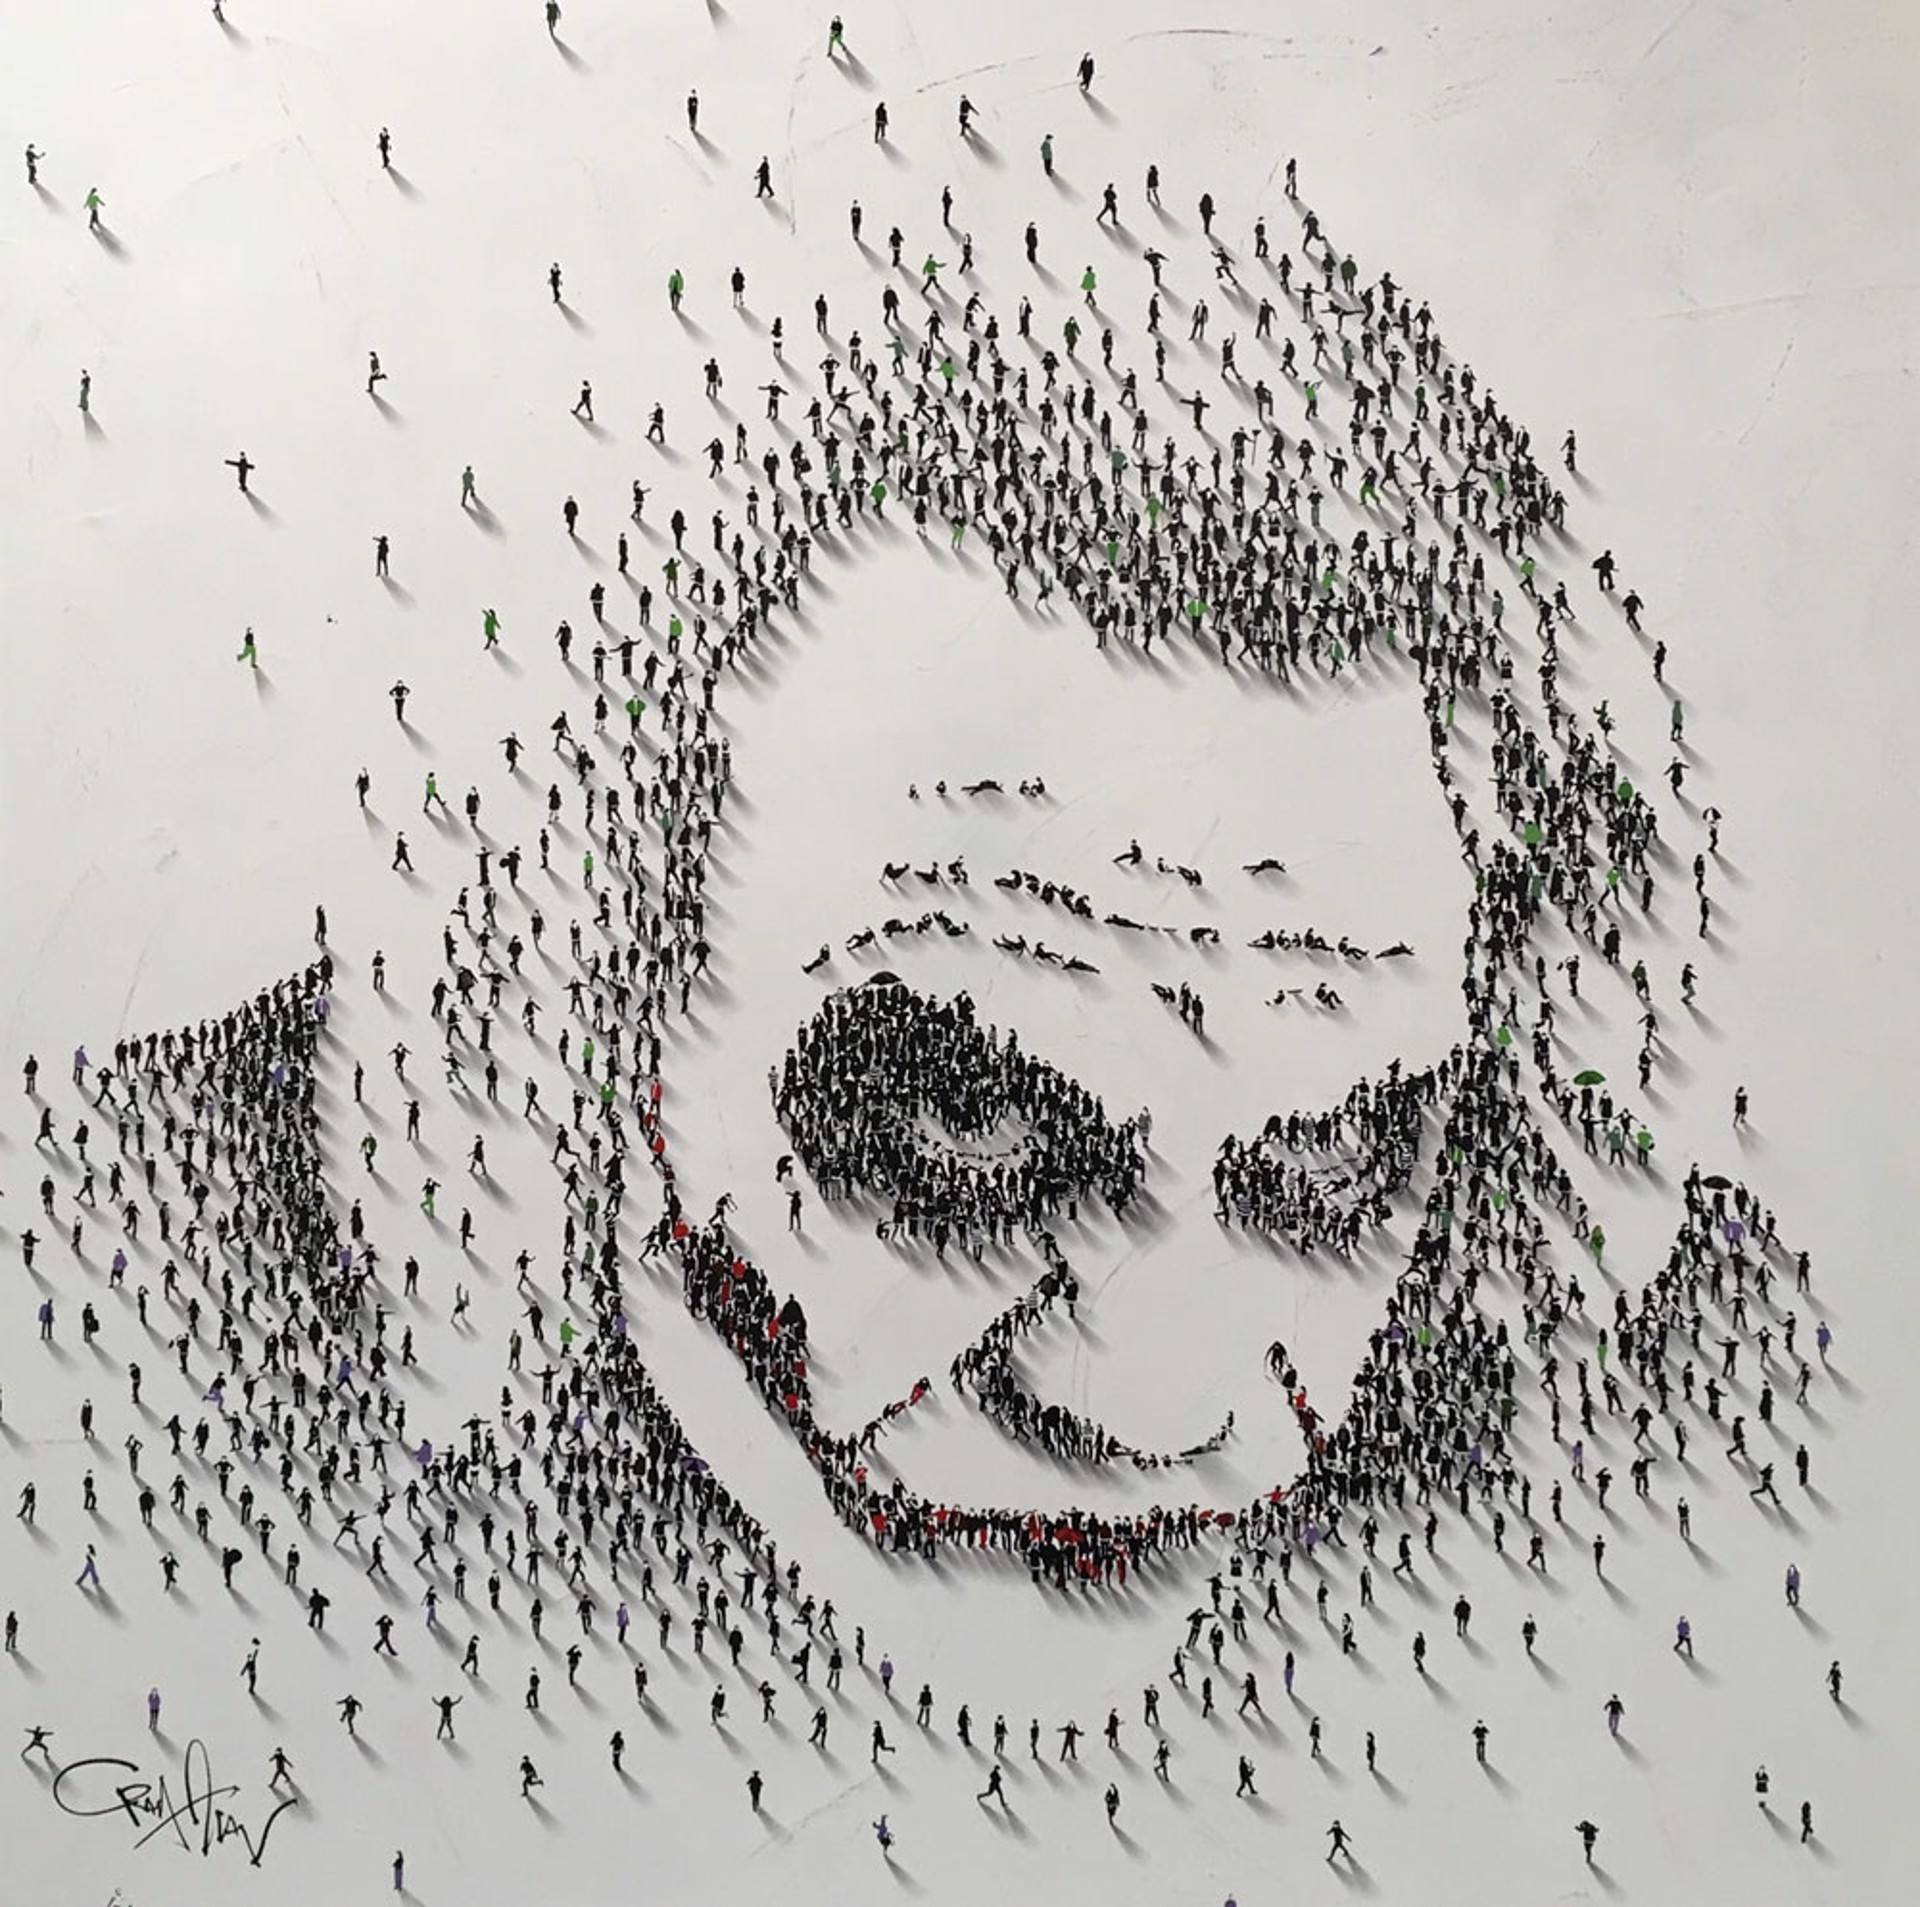 Why So Serious? by Craig Alan, Populus Figurative